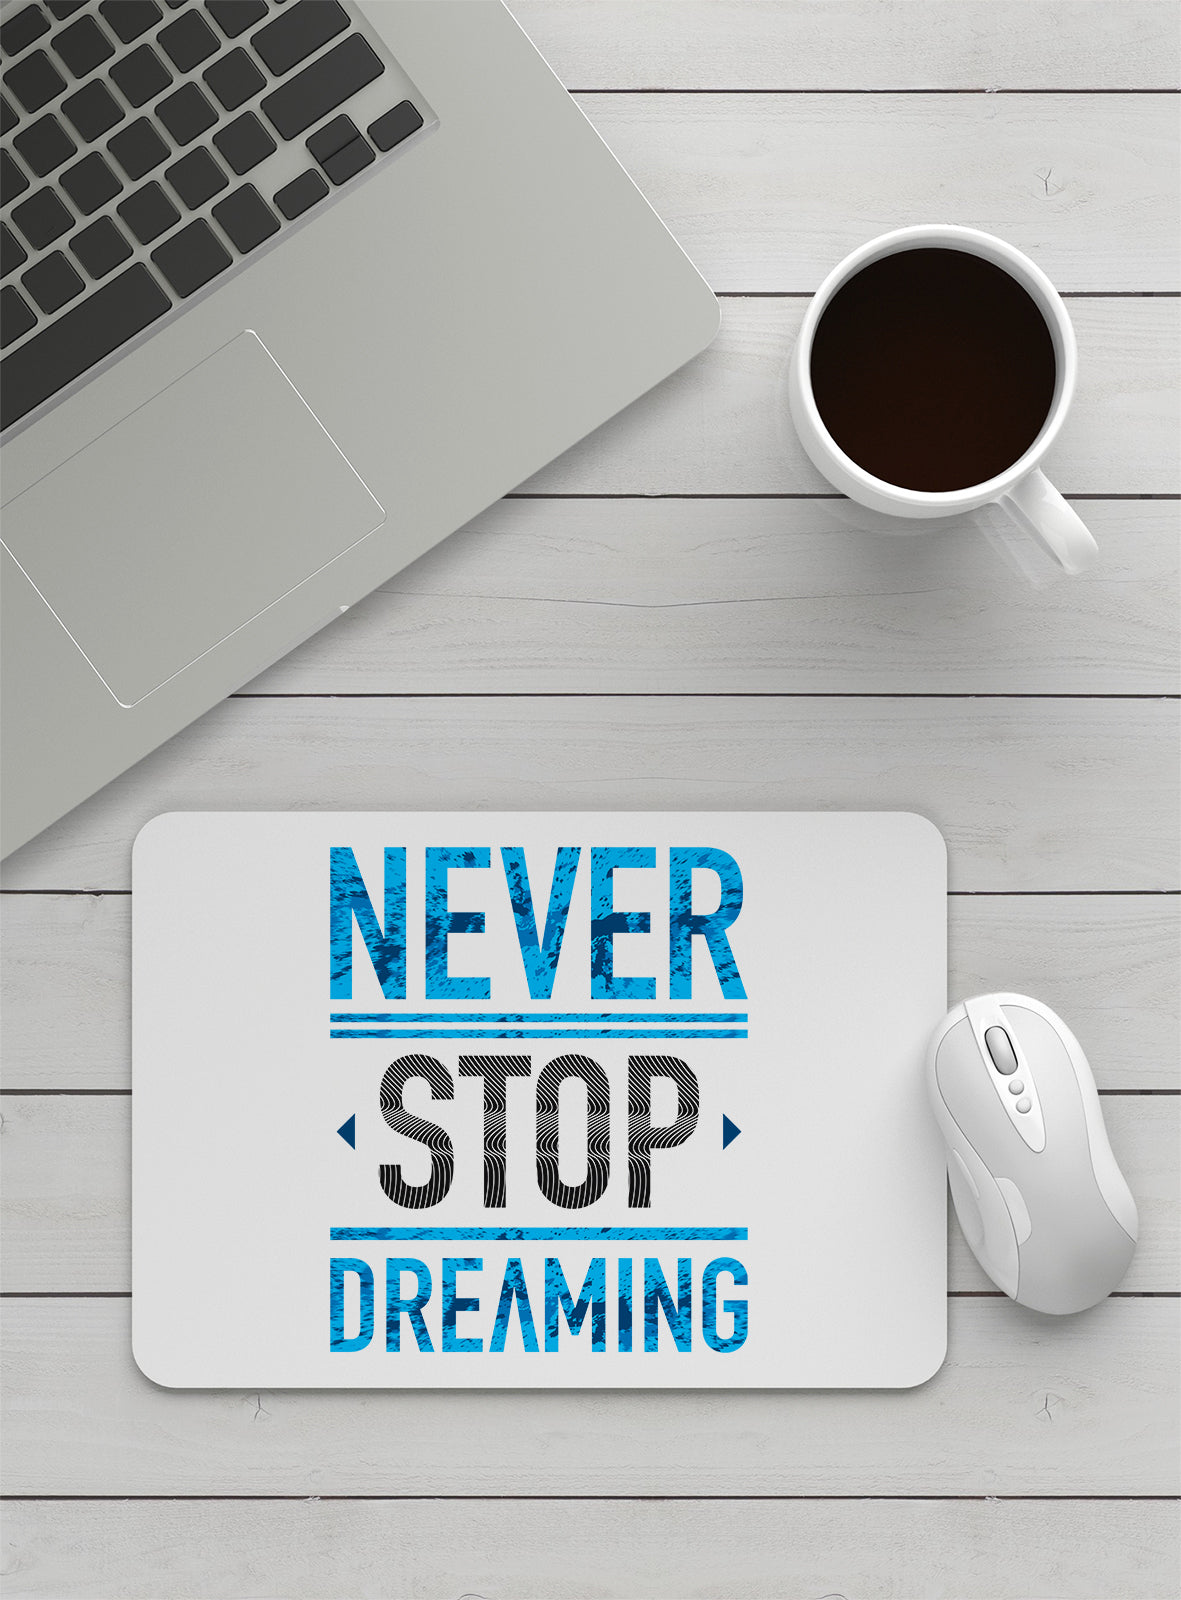 NEVER STOP DREAMING